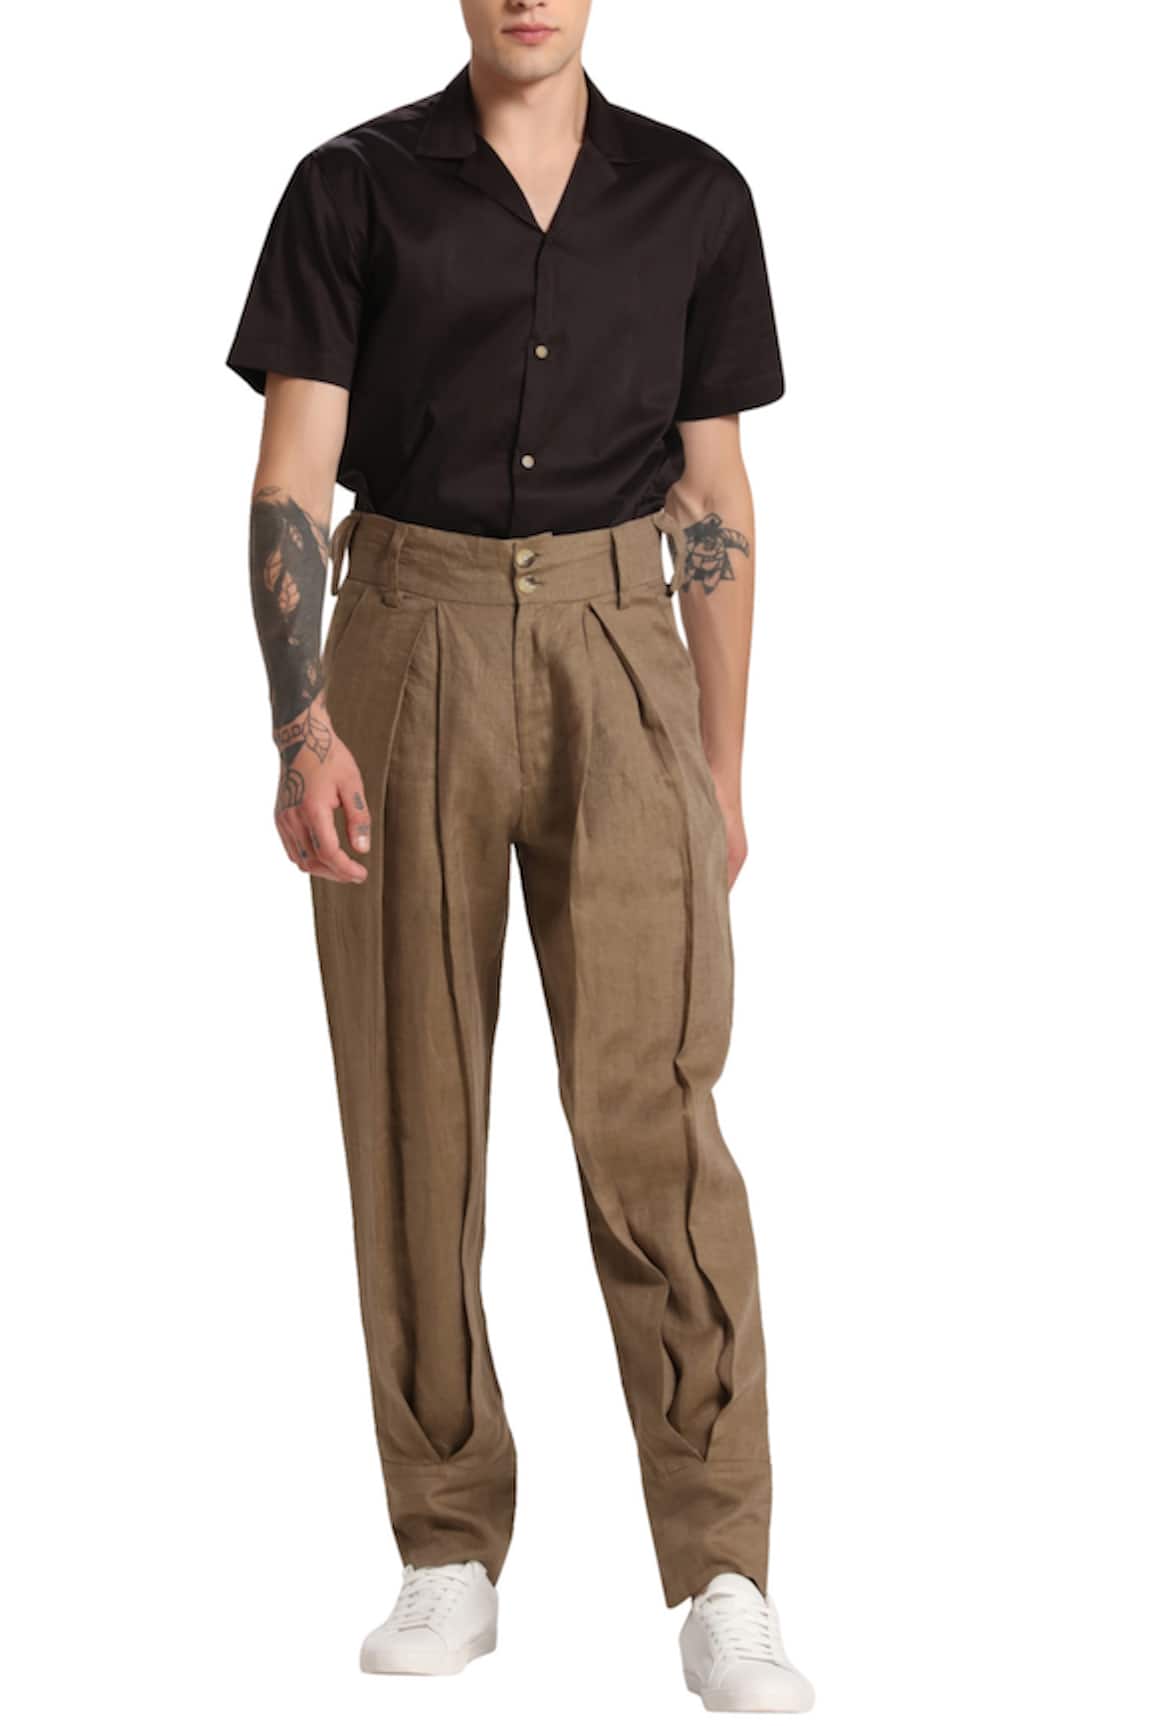 Post The Modhemian How to Wear Hight Waisted Pleated Pants and Not Look  Like A Goober  The Modhemian